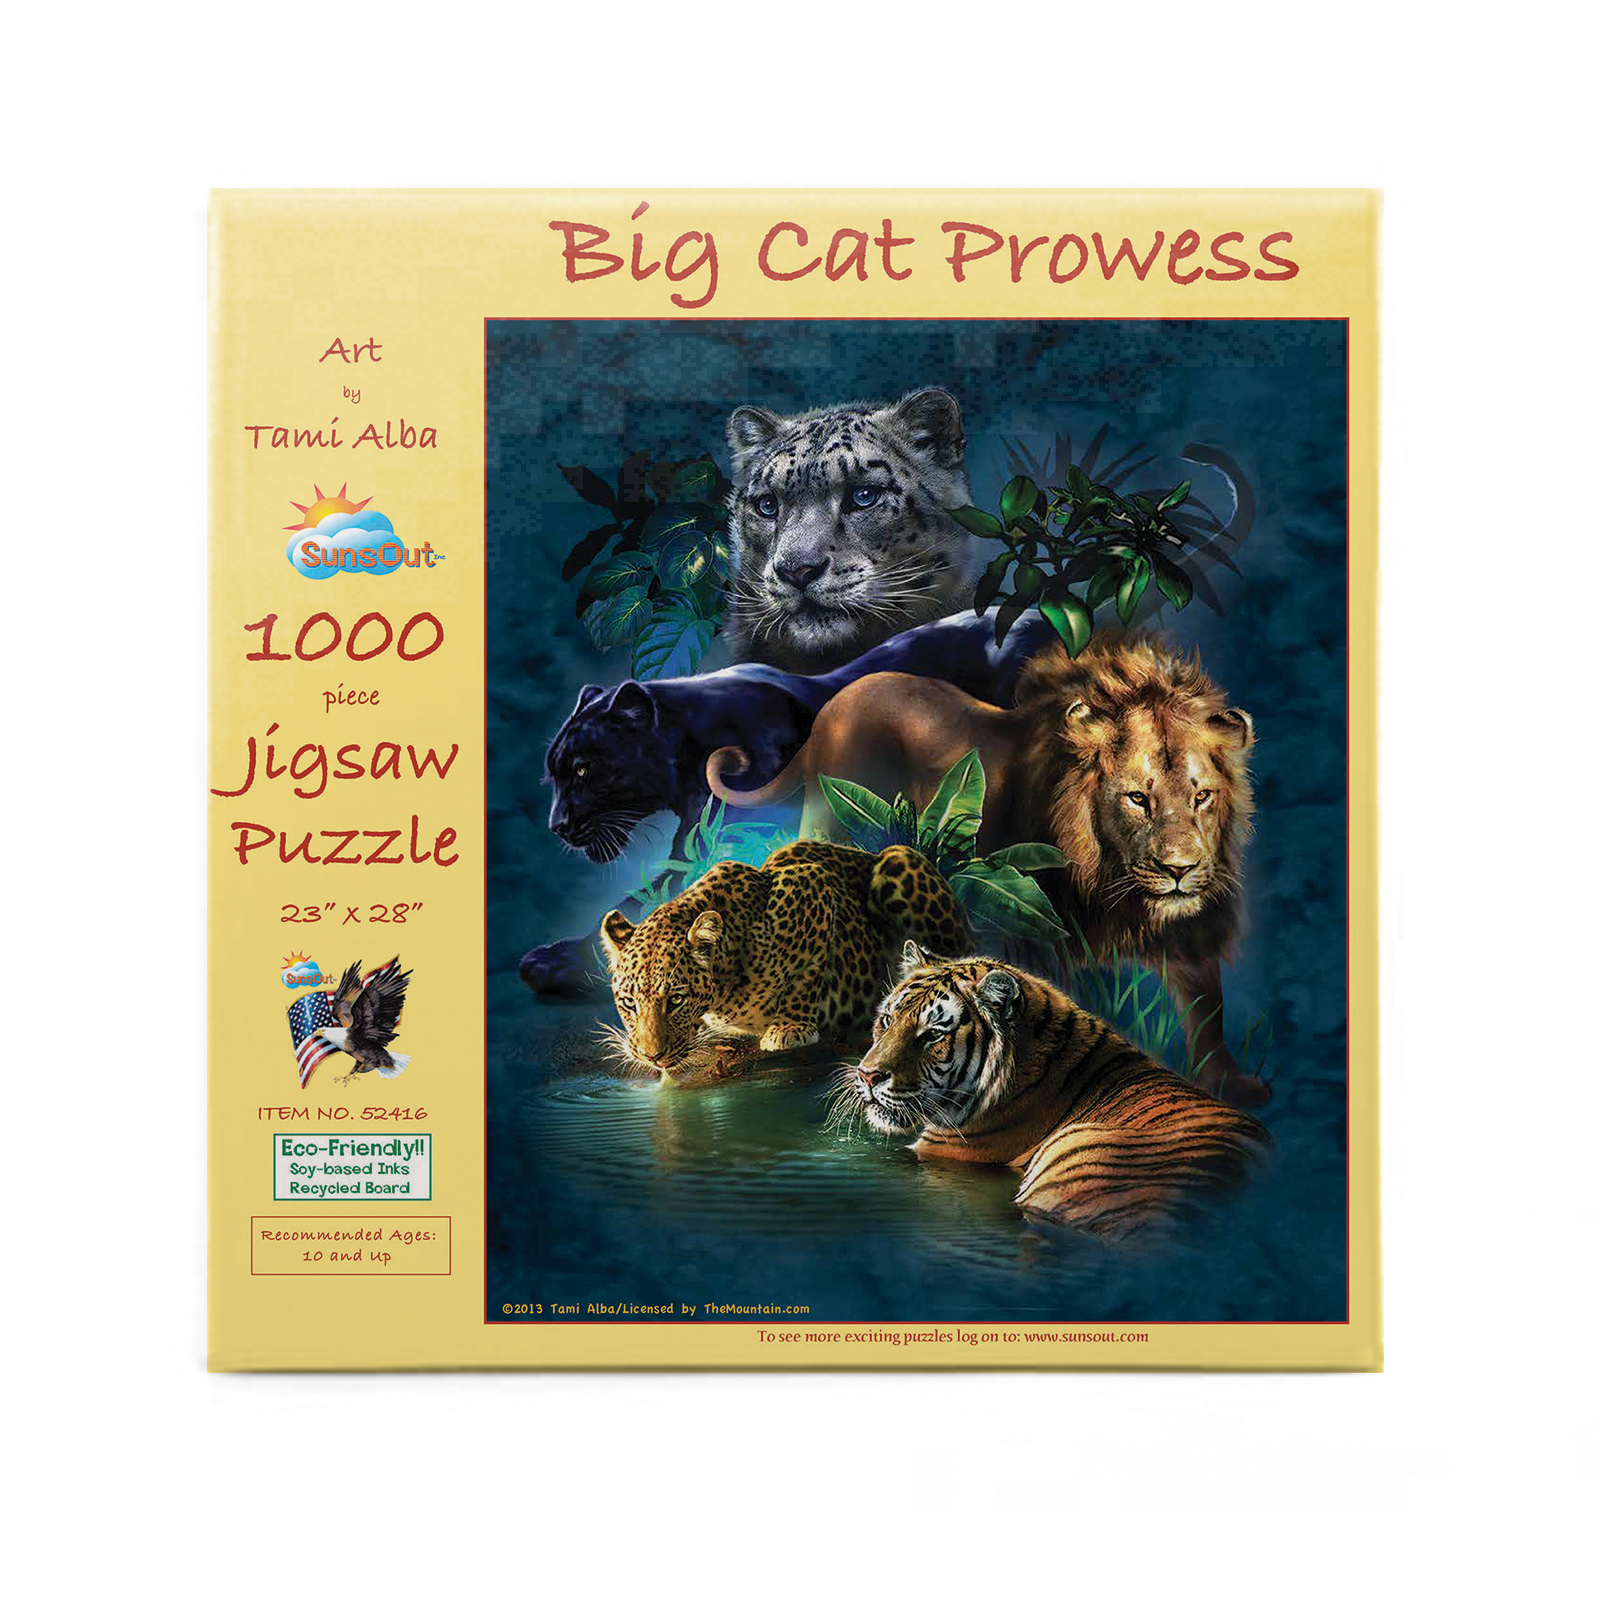 Big Cat Prowess